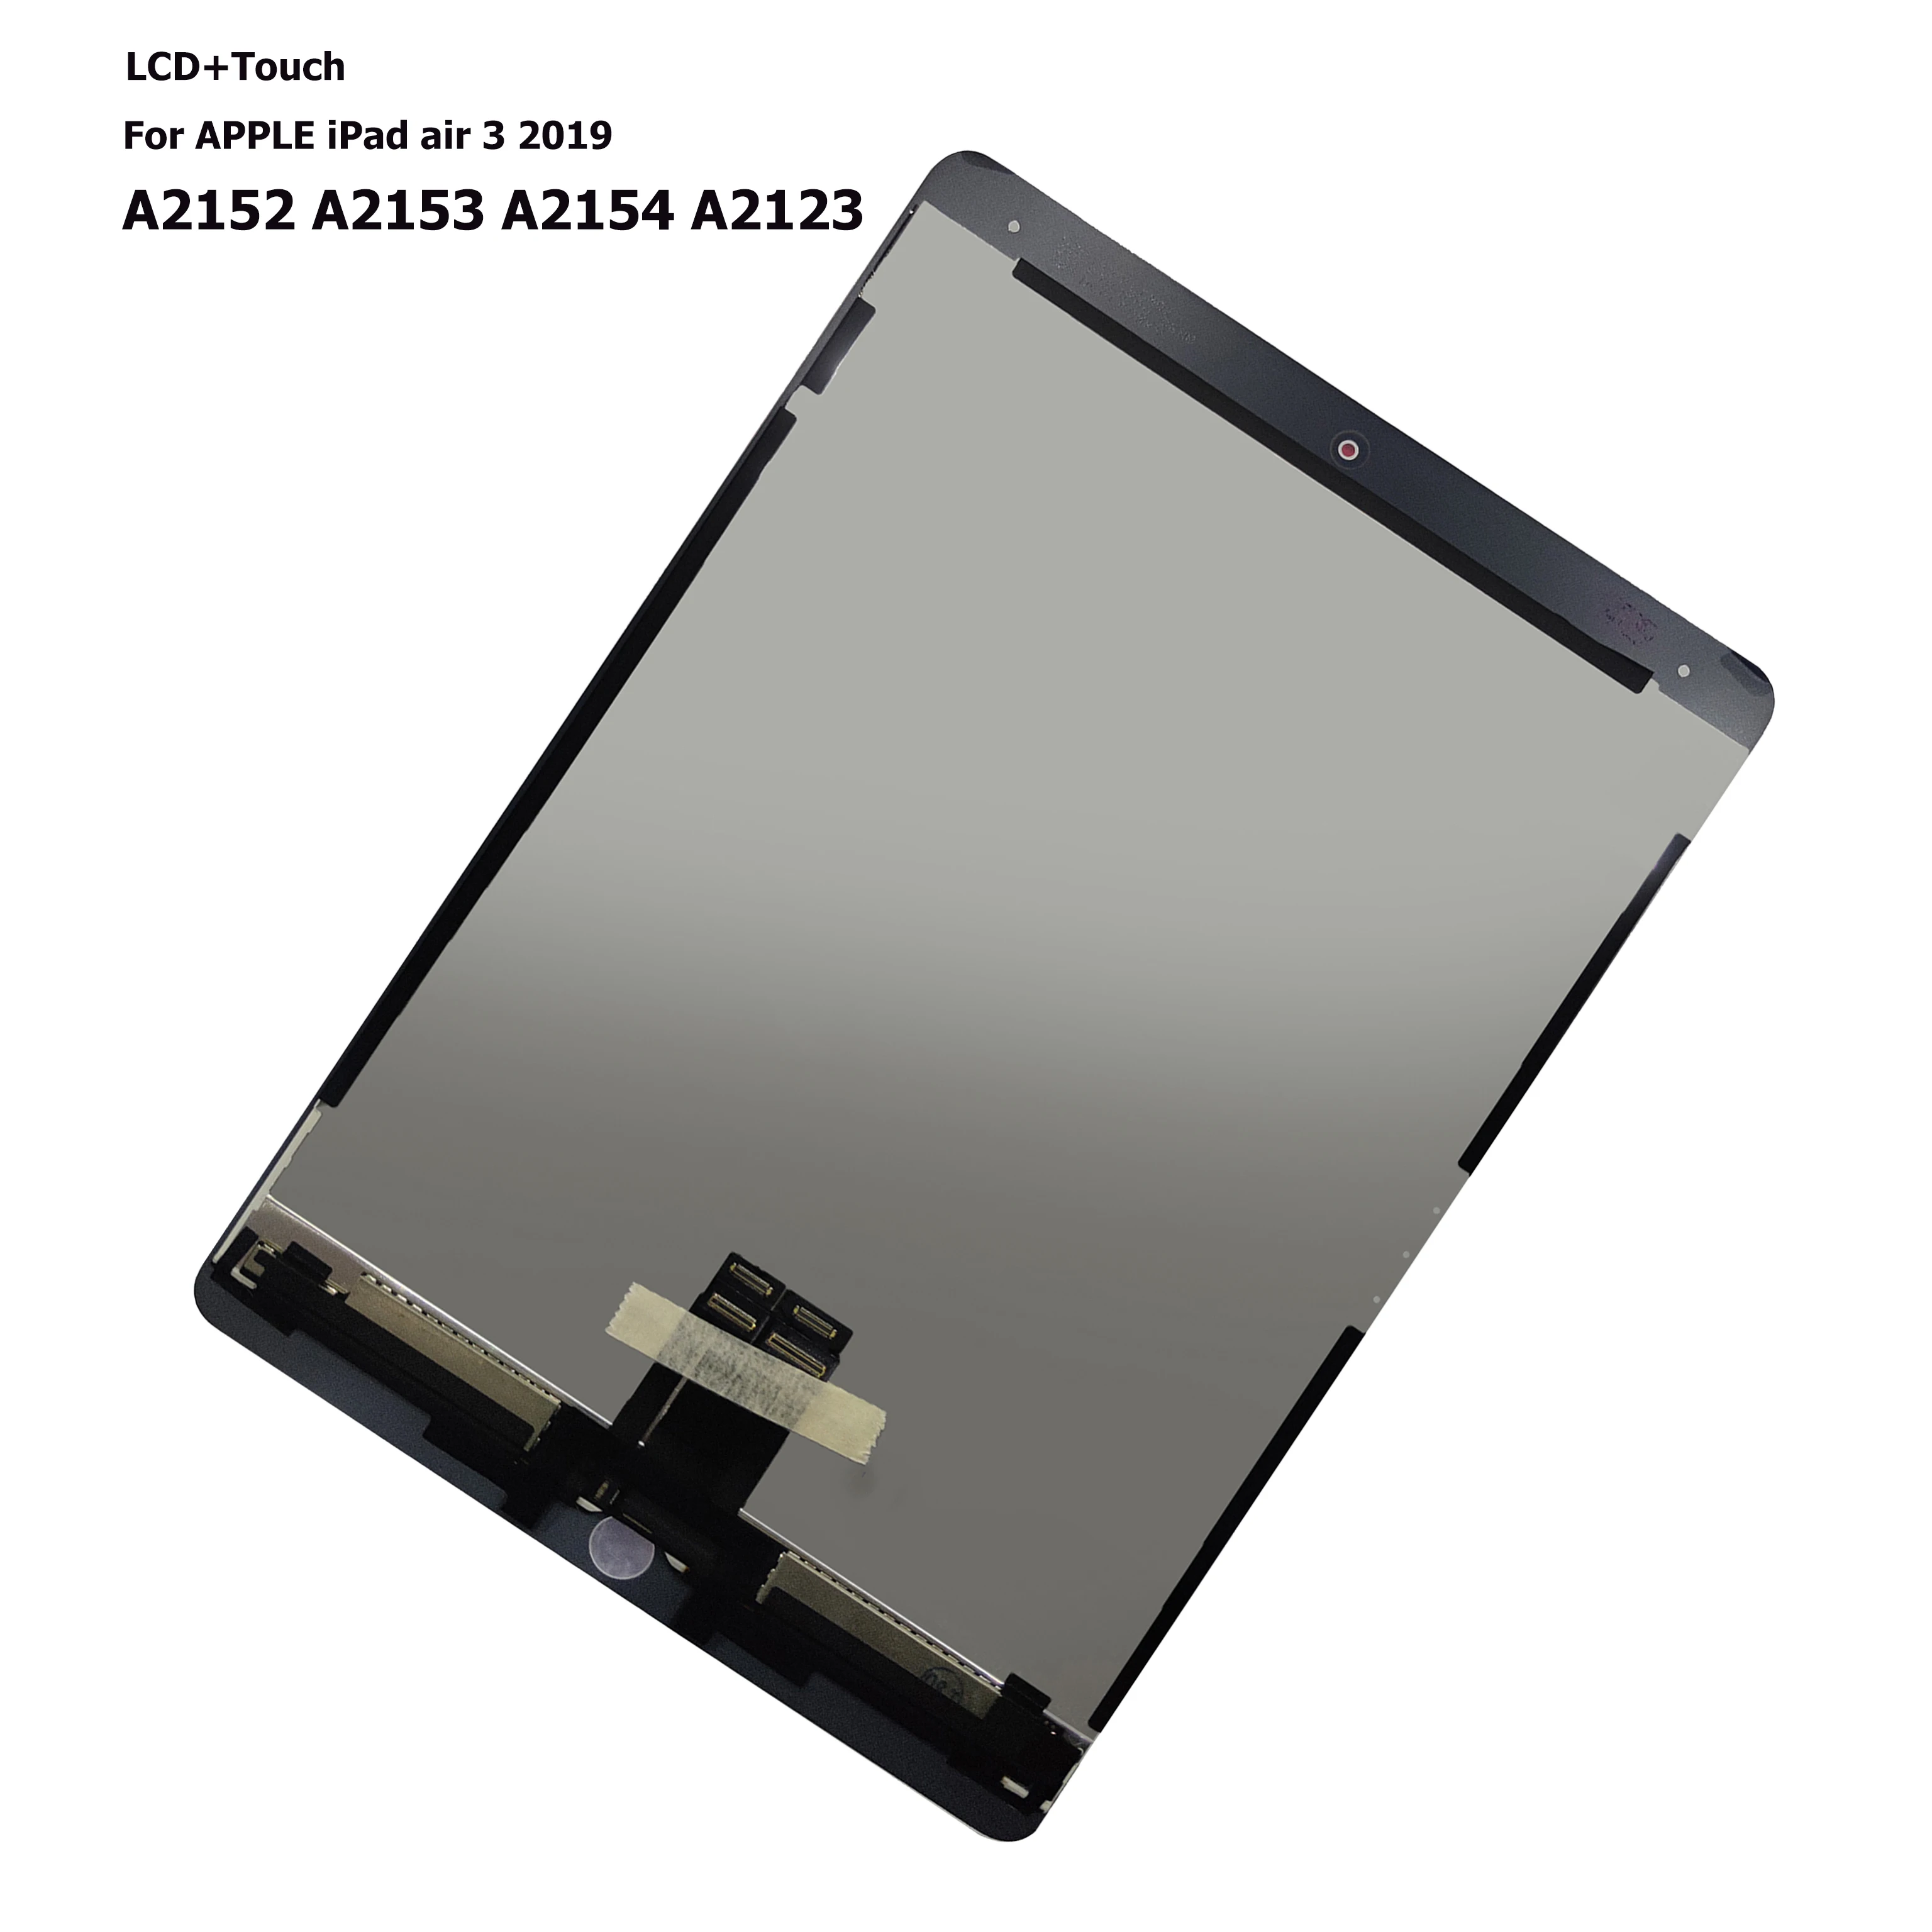 LCD For iPad Air 3 2019 A2152 A2123 A2153 A2154 Display Touch Screen Digitizer Assembly LCD For iPad Pro 10.5 2nd Gen